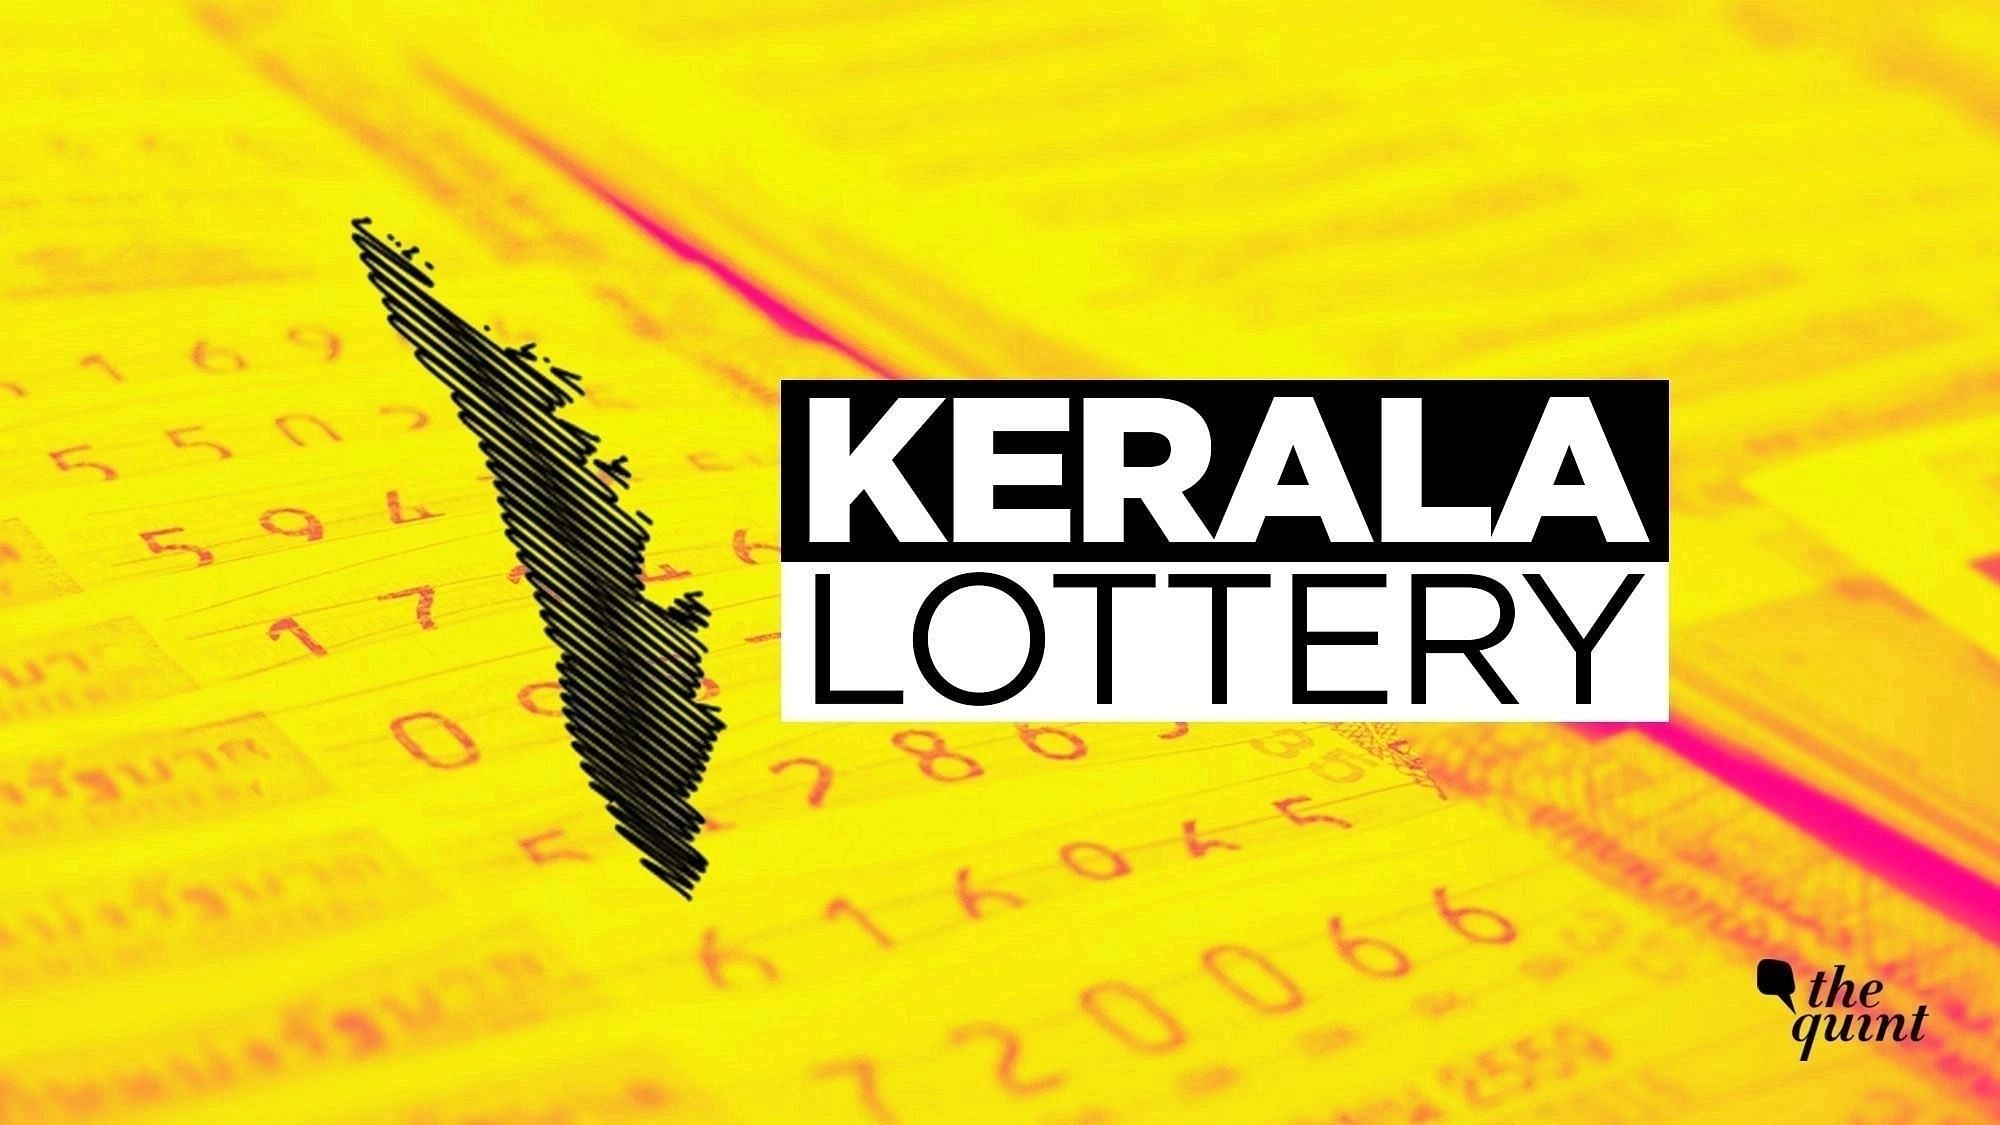 <div class="paragraphs"><p>The Kerala Lottery&nbsp;Akshaya AK 621 prize money for Sunday is mentioned here.</p></div>